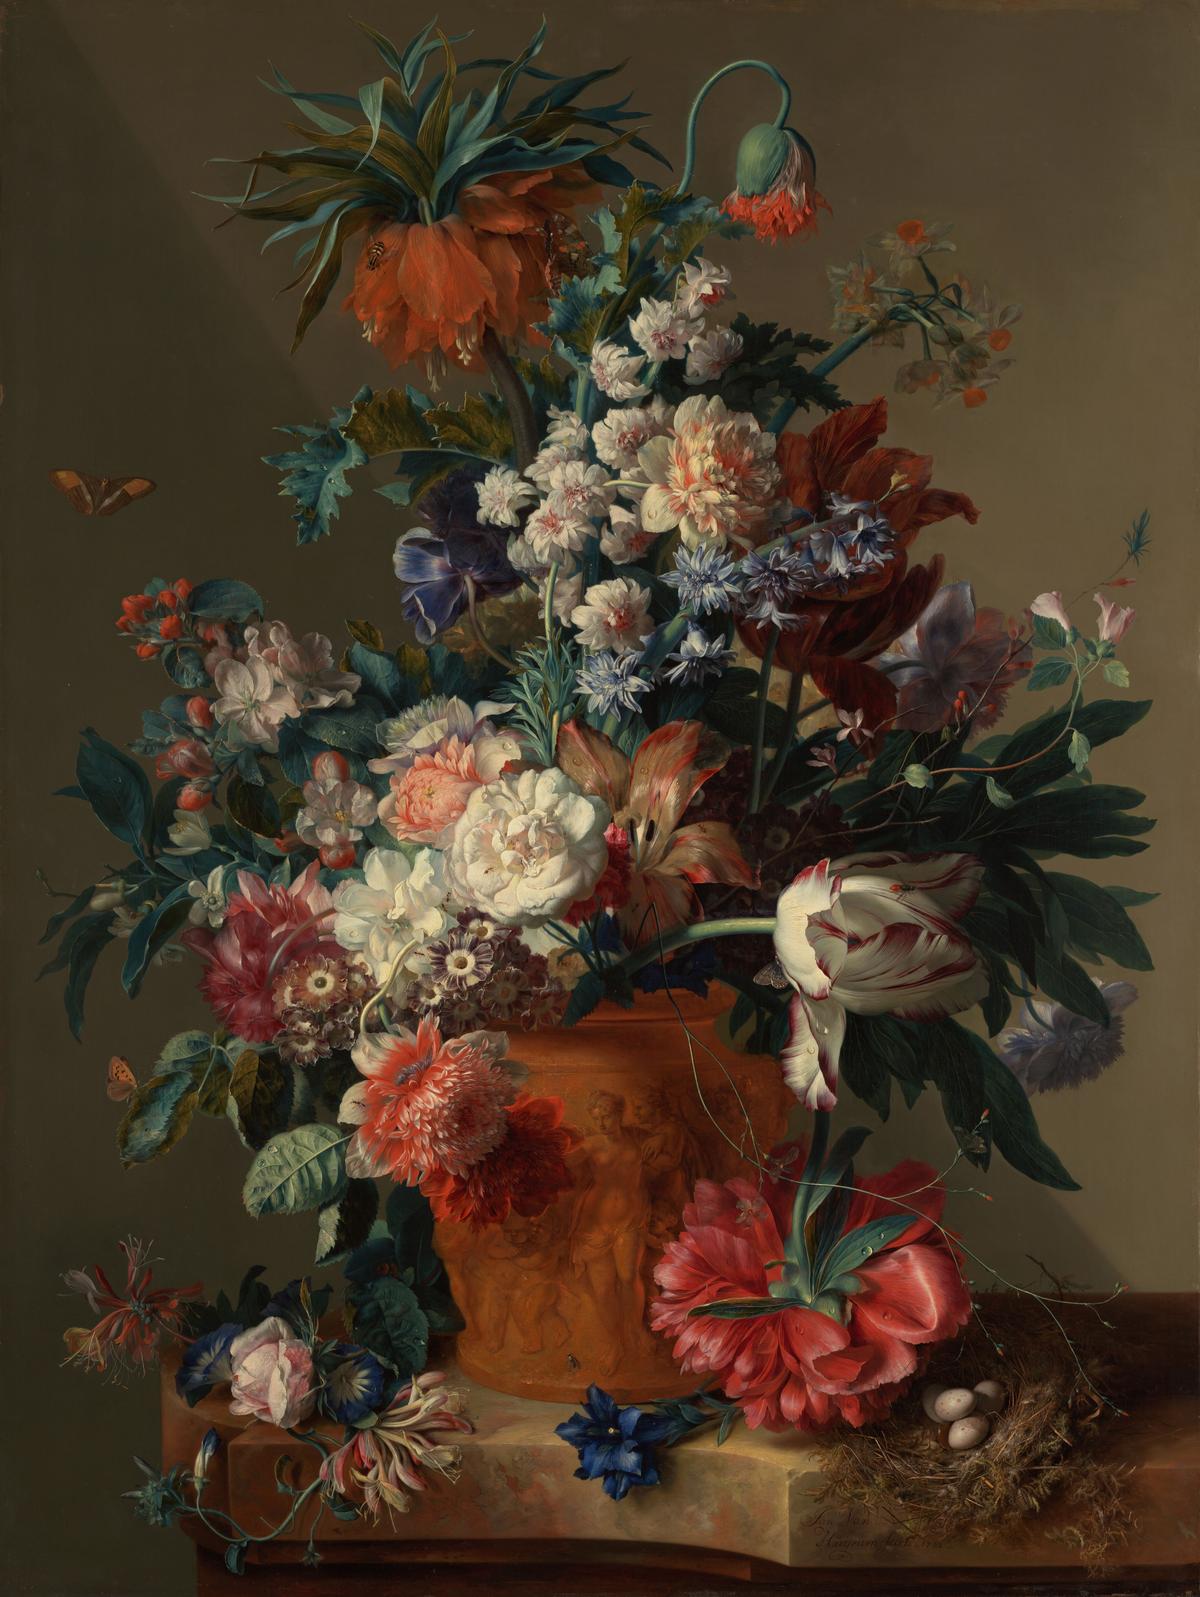 "Vase of Flowers," 1722, by Jan van Huysum. Oil on panel; 31 5/8 inches by 24 inches. Getty Center, Los Angeles. (Public Domain)